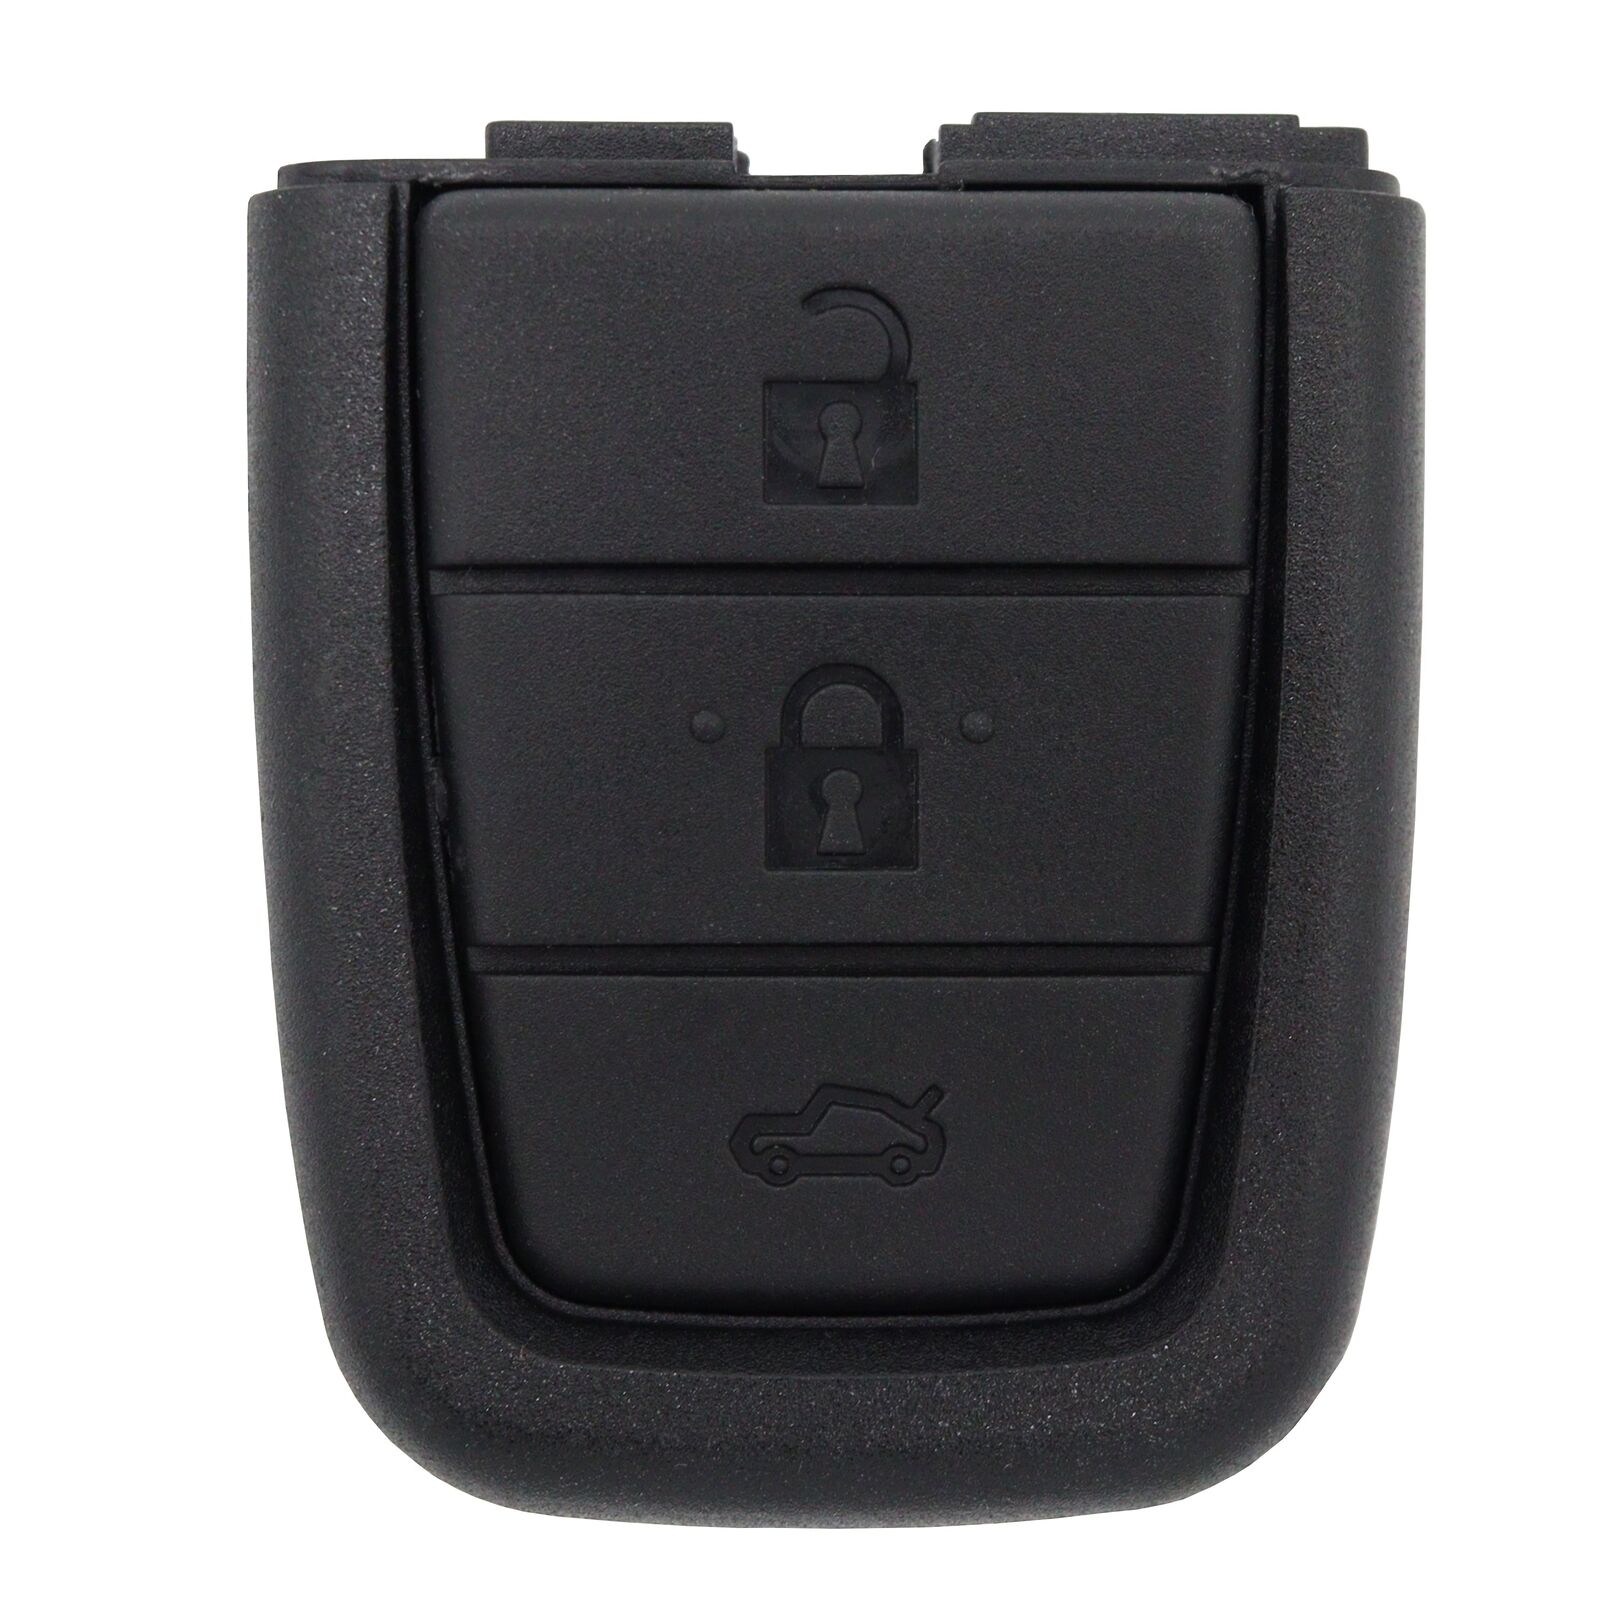 To Suit Holden VE SS SSV SV6 Commodore Replacement Key Blank Shell/Case/Enclo...